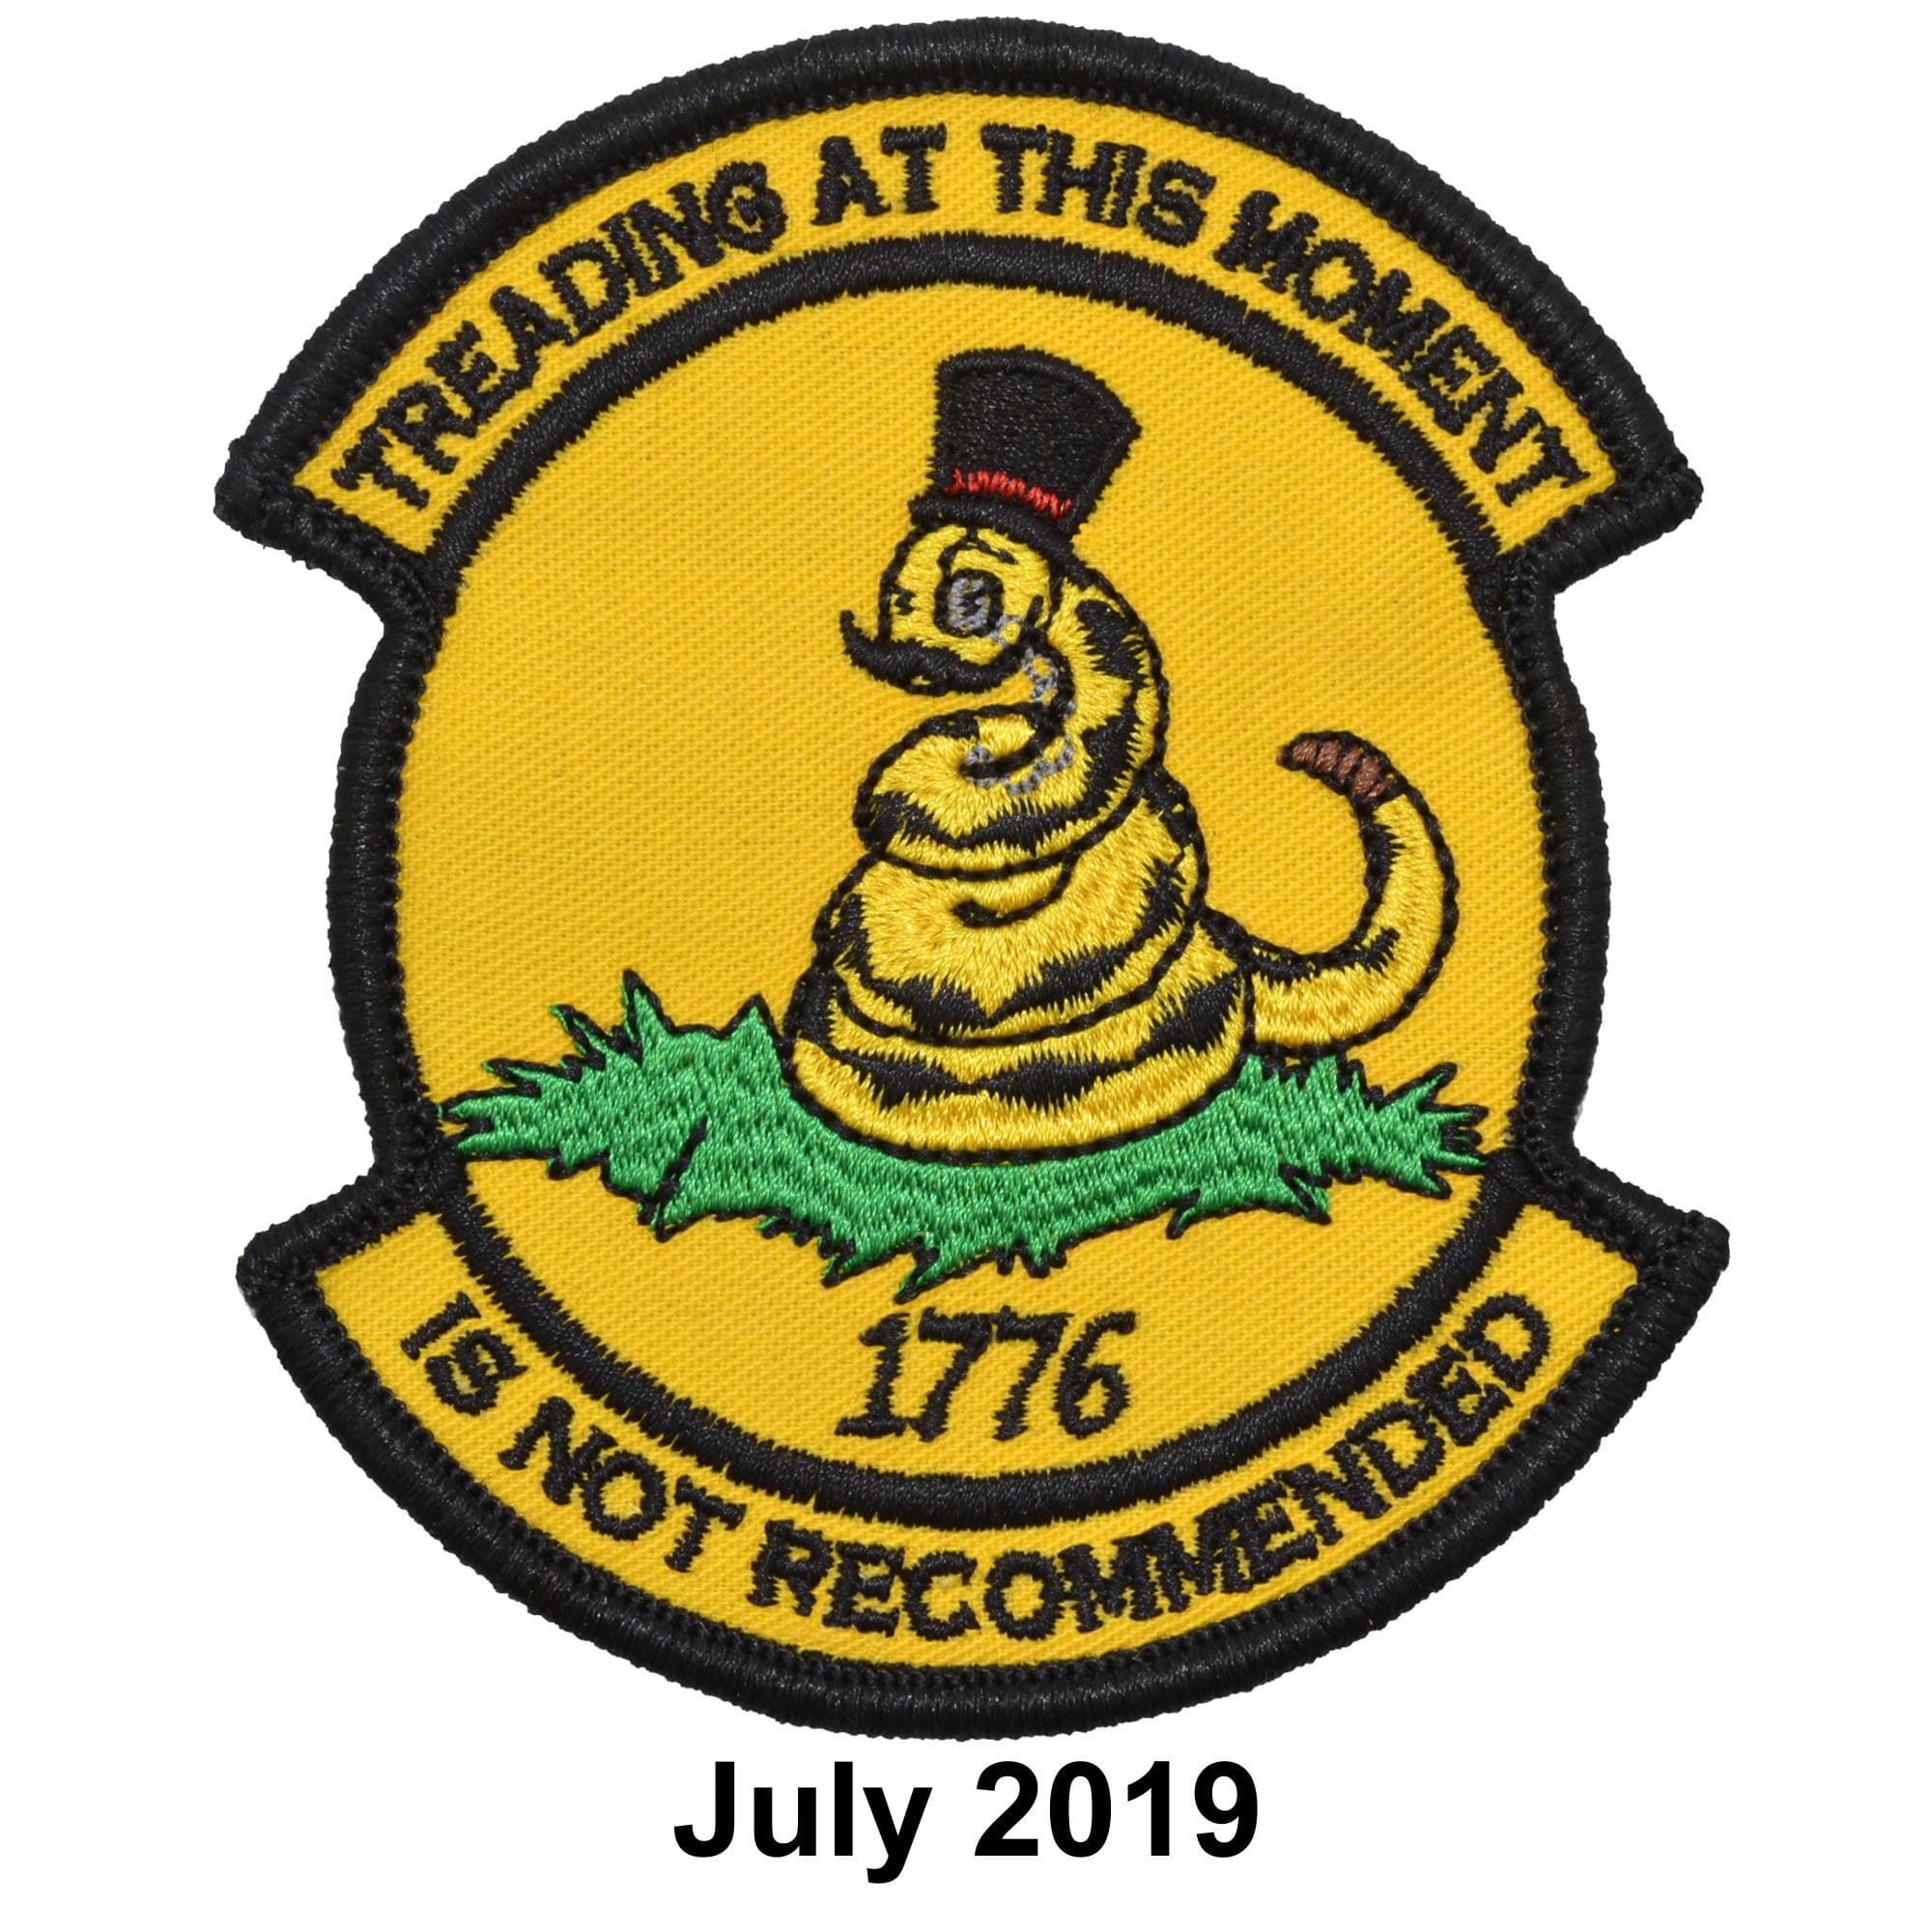 July 2019 Patch of the Month - Treading is Not Advised